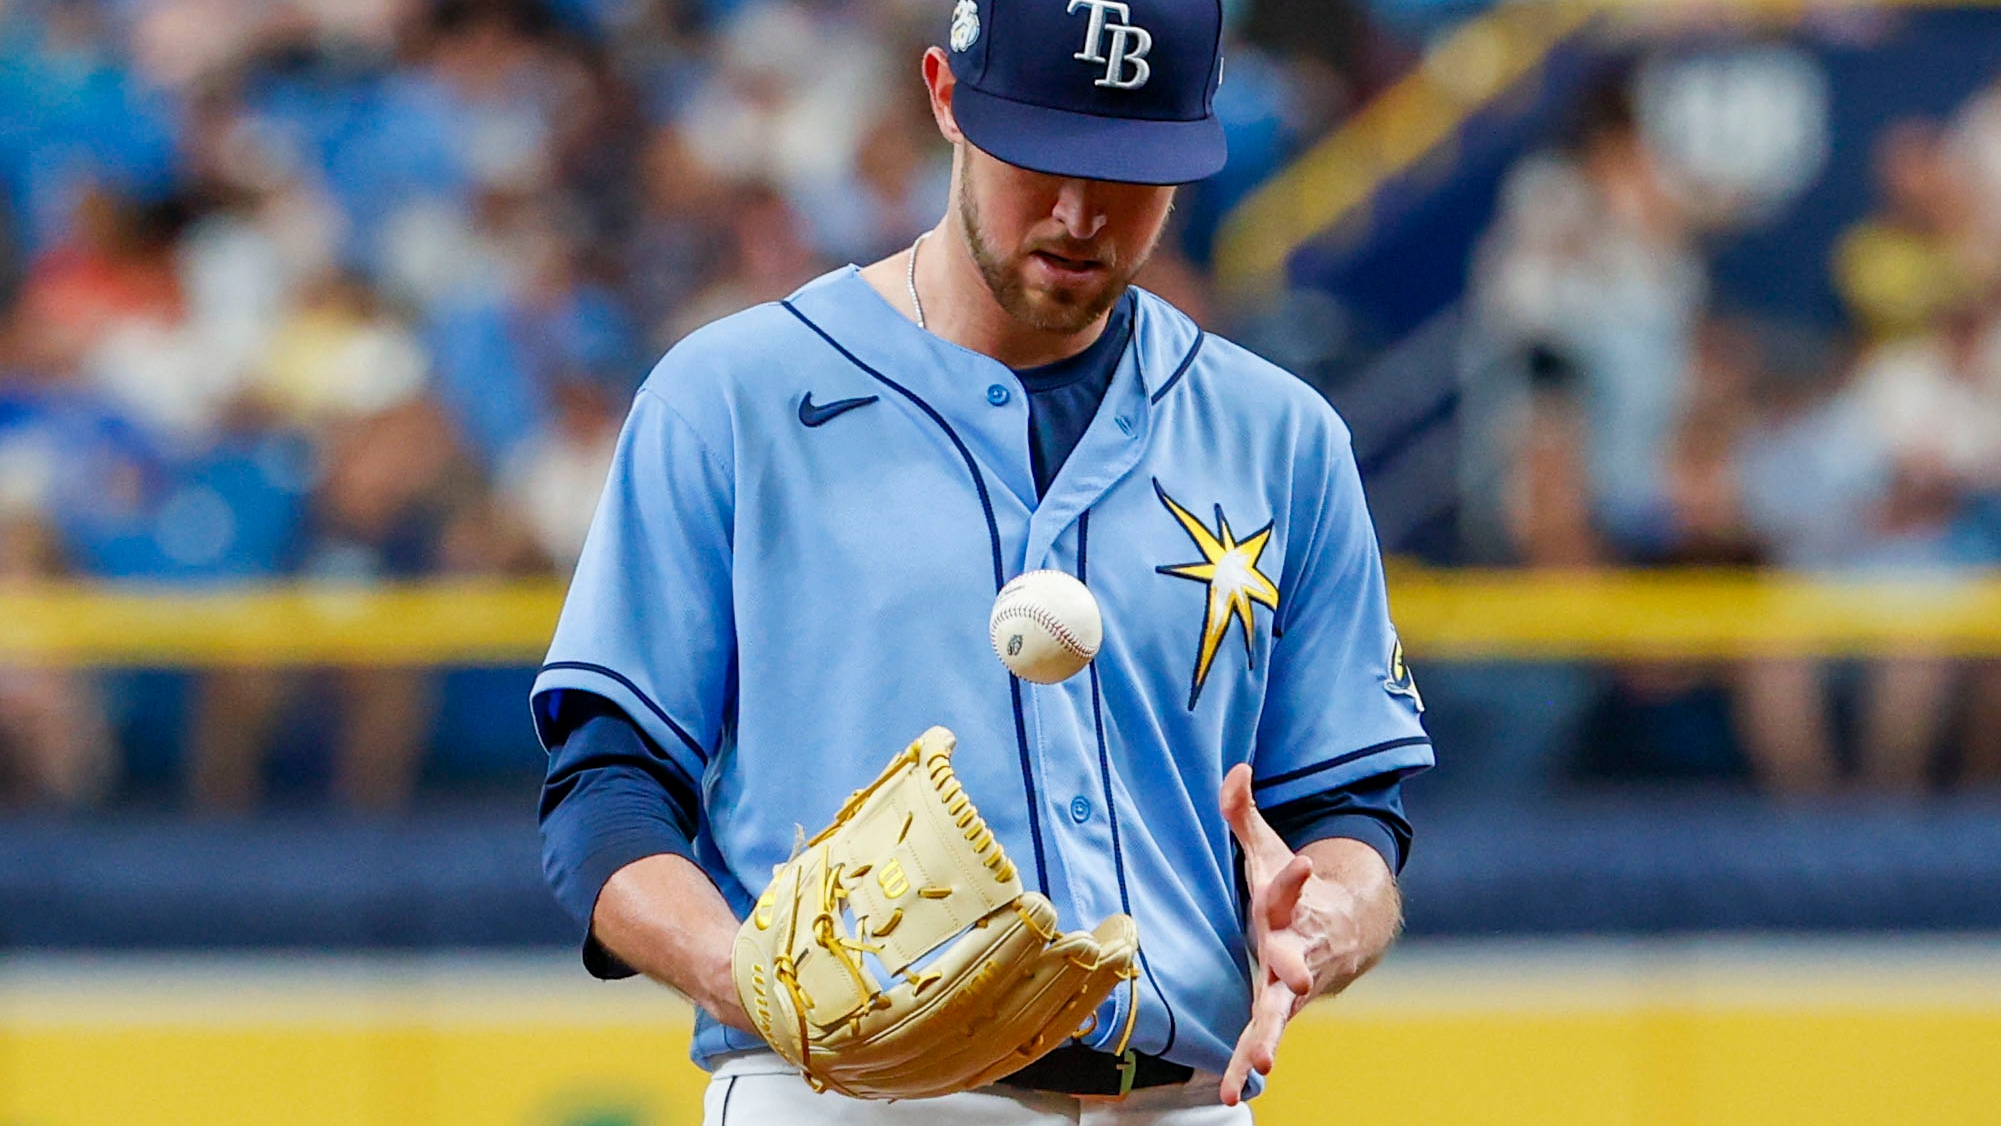 World Series 2020: will the Rays spring a surprise over the